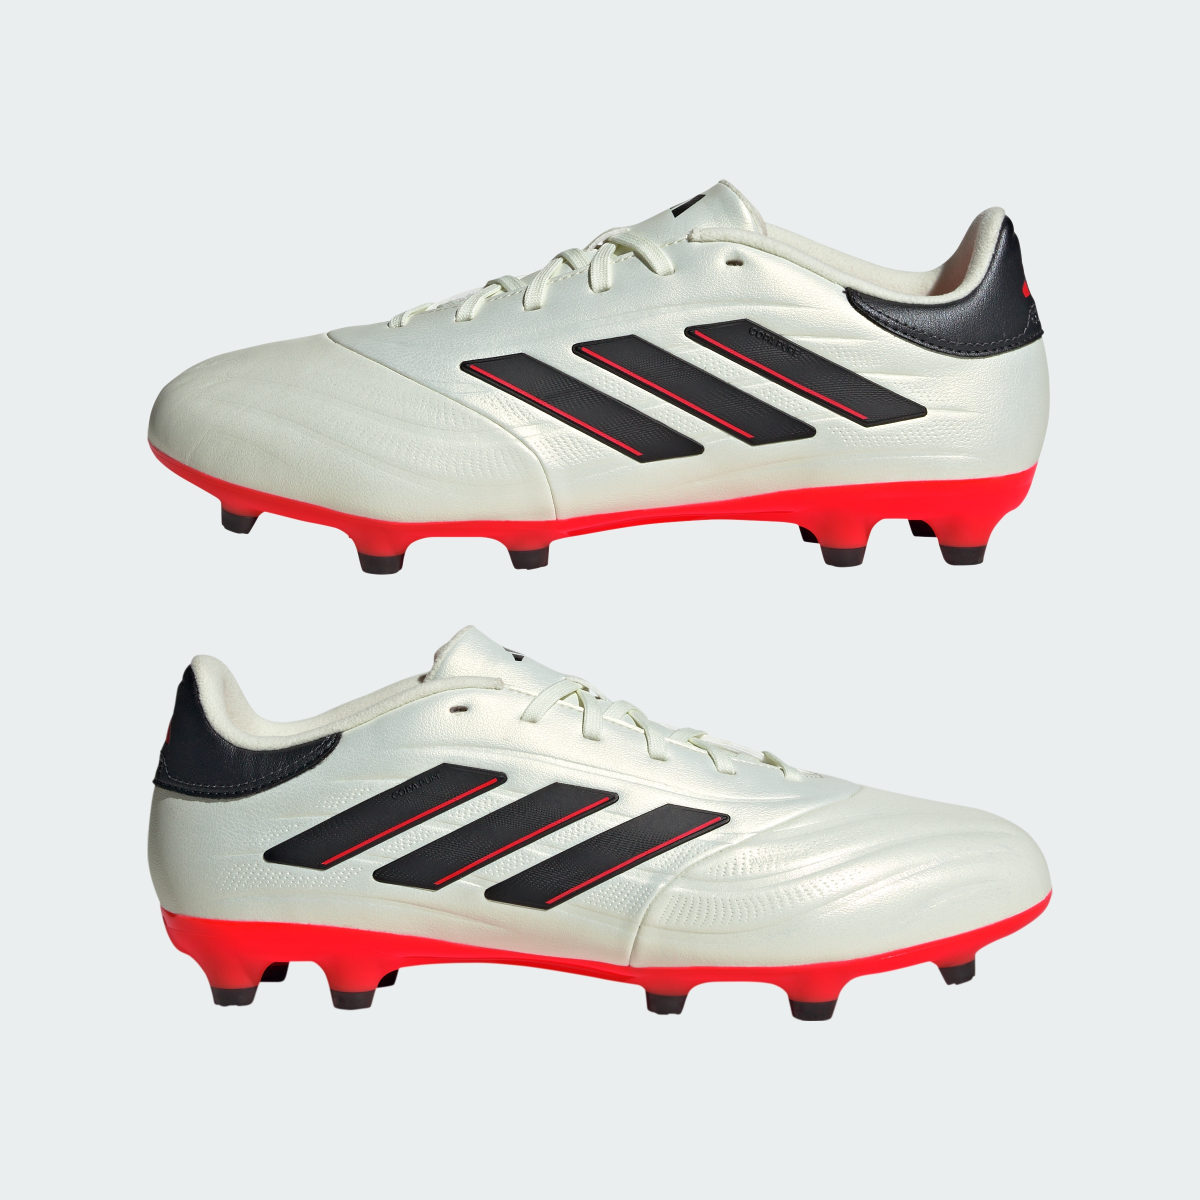 Adidas Copa Pure II League Firm Ground Boots. 11